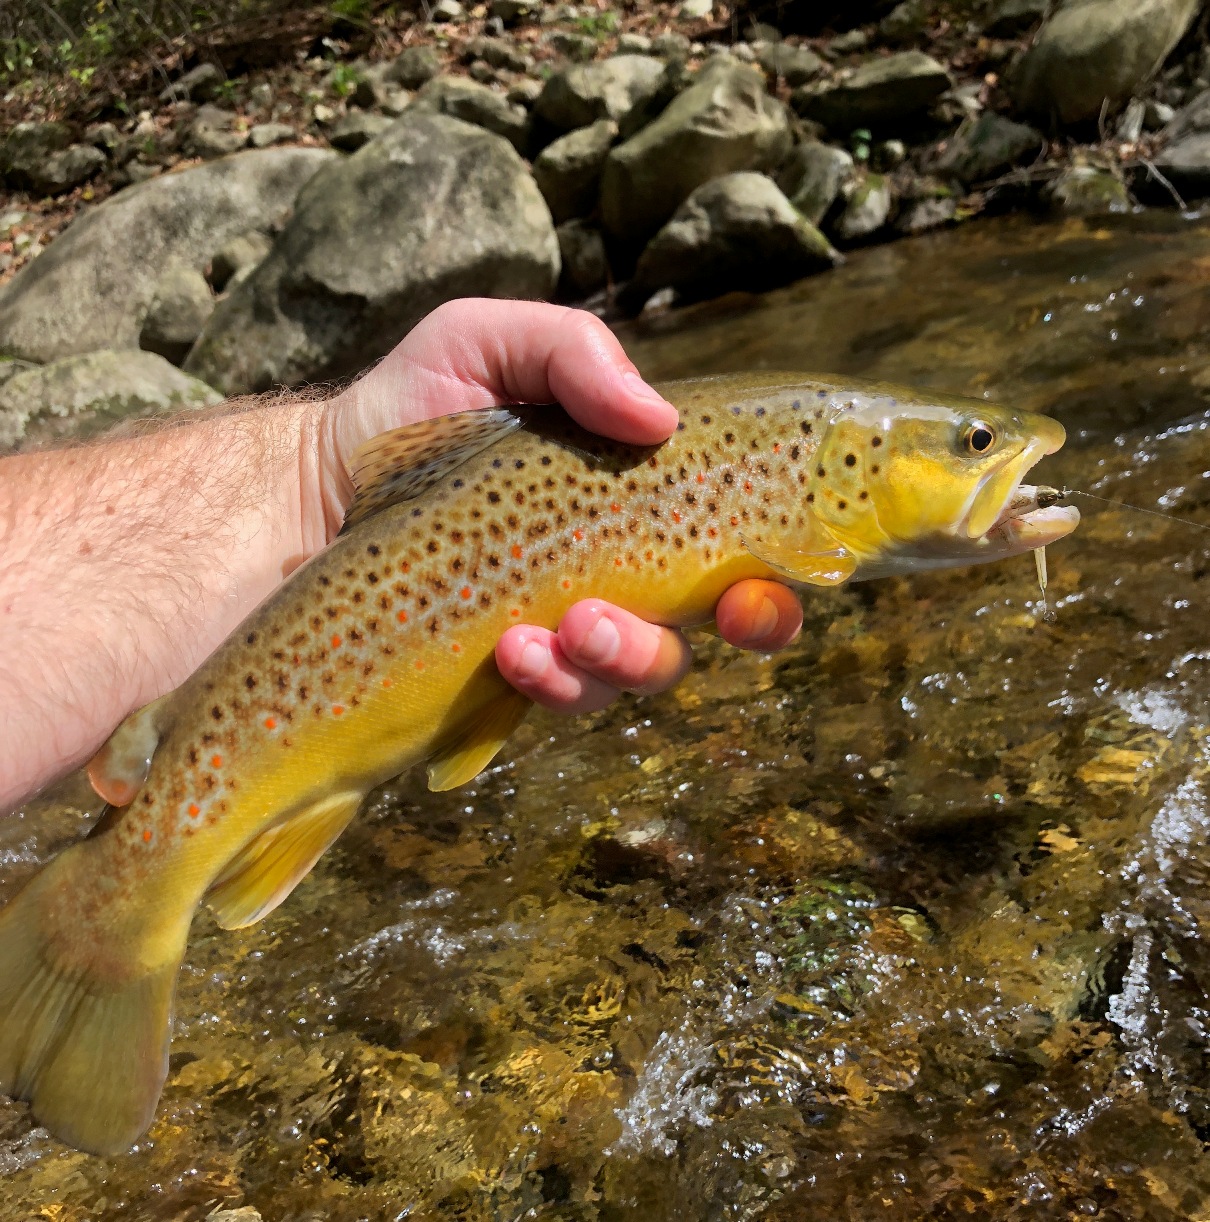 An image of a 14 inch long brown trout that was caught with a steamer